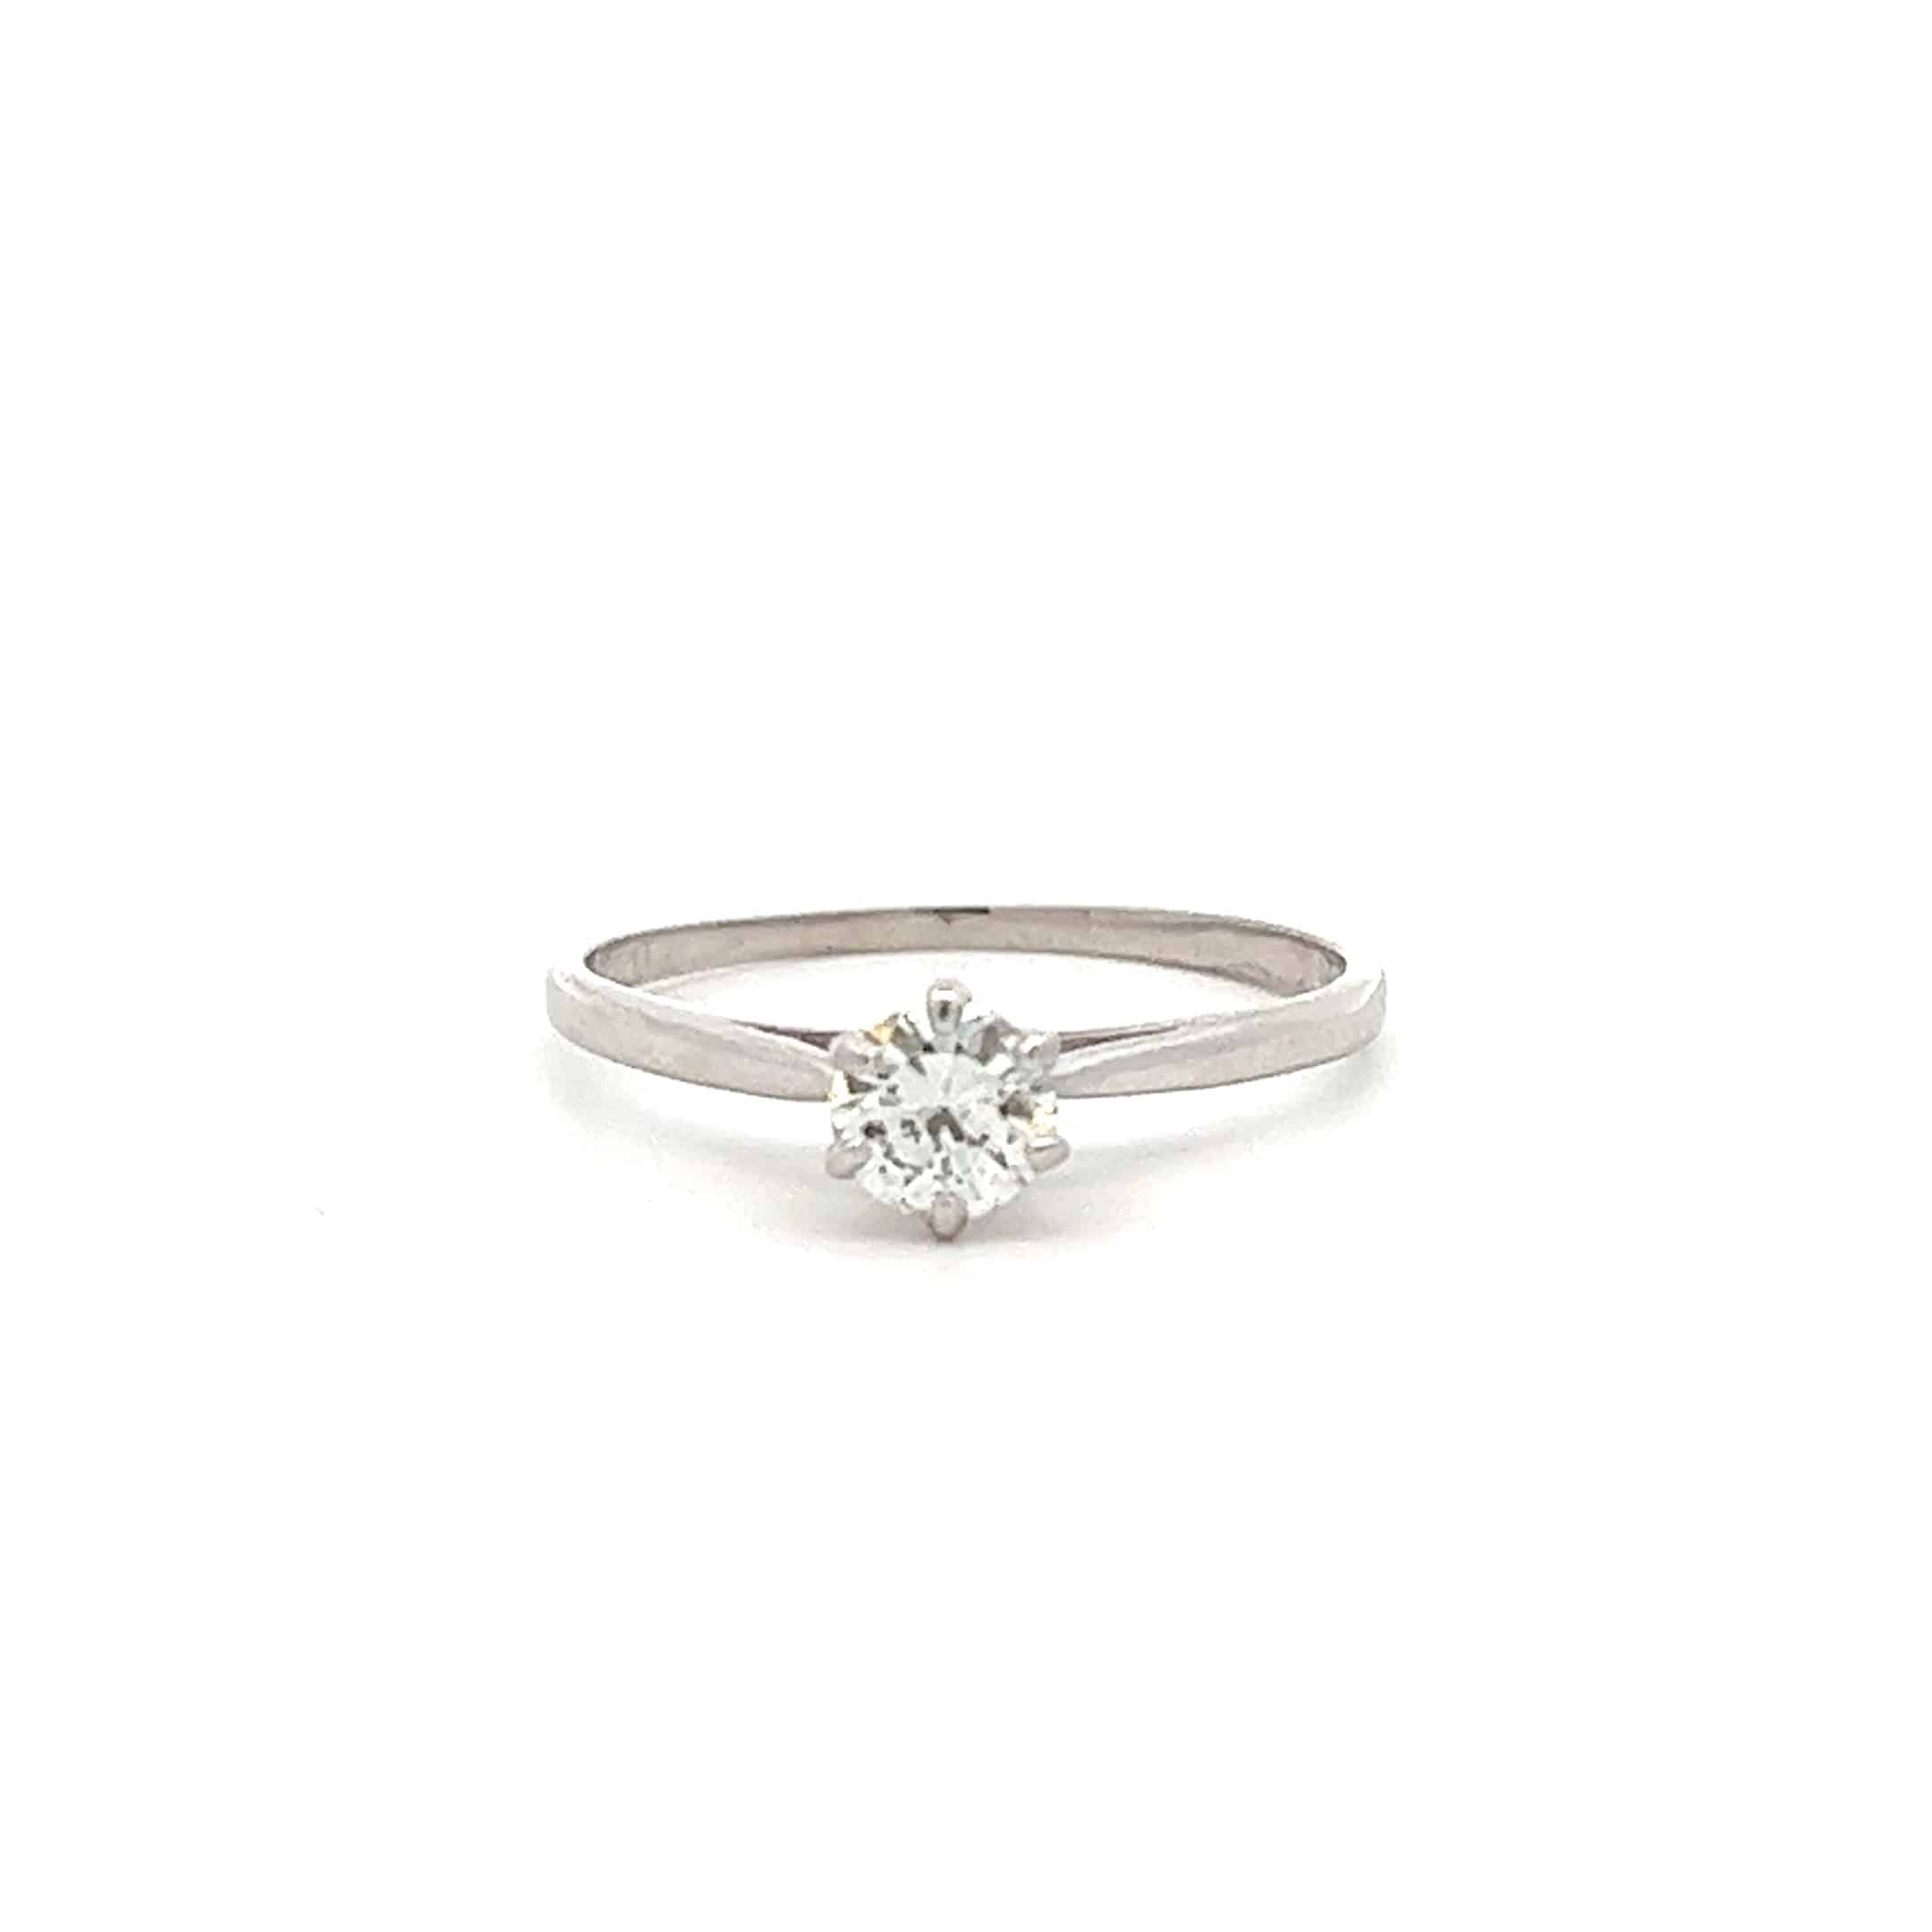 Pre-Owned Platinum Six Claw Diamond Solitaire Ring – Diamond Weight 0.33ct Assessed